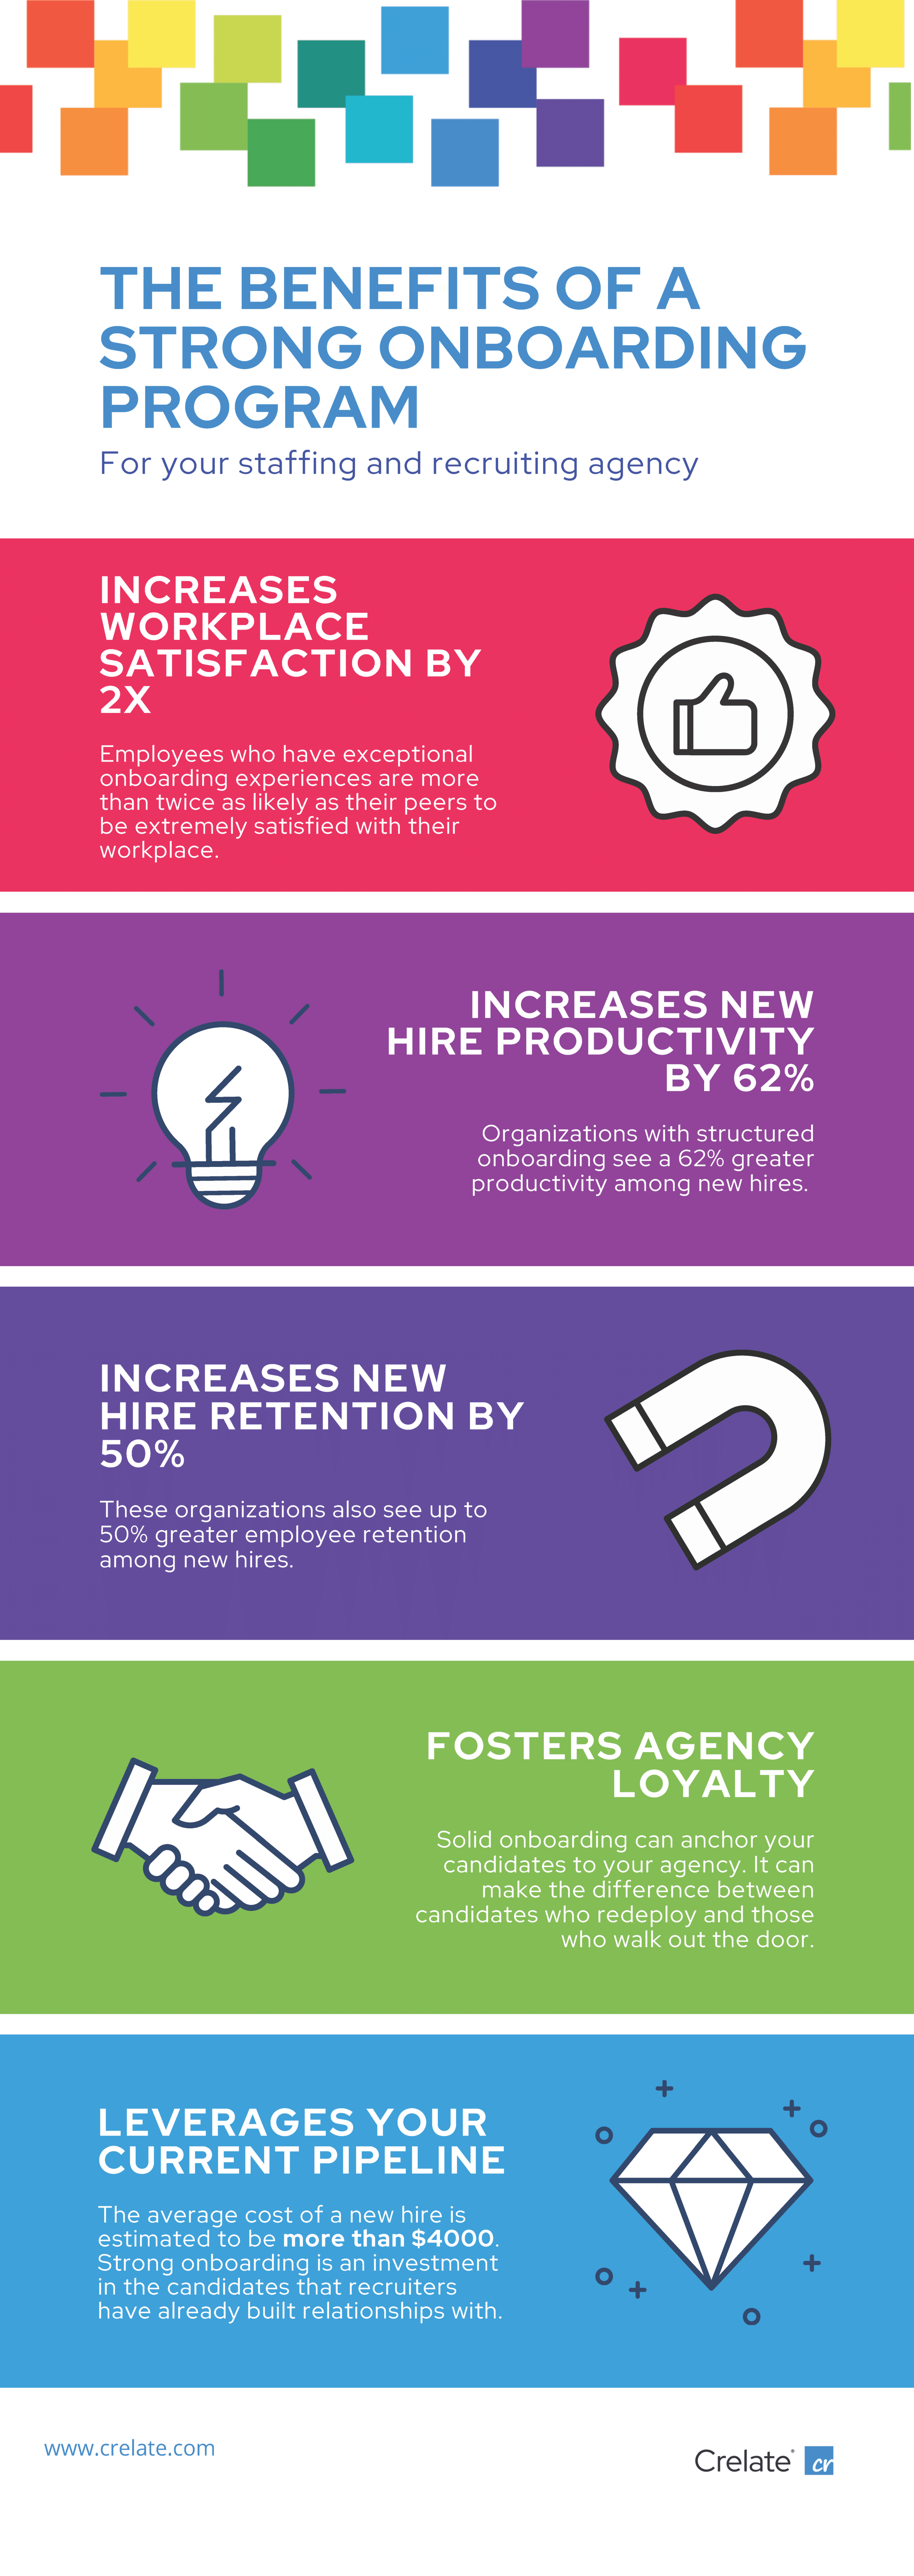 A vibrant infographic highlighting the benefits of a strong onboarding program for staffing and recruiting agencies, showcasing statistics on workplace satisfaction, new hire productivity, employee retention, agency loyalty, and leveraging current pipelines.